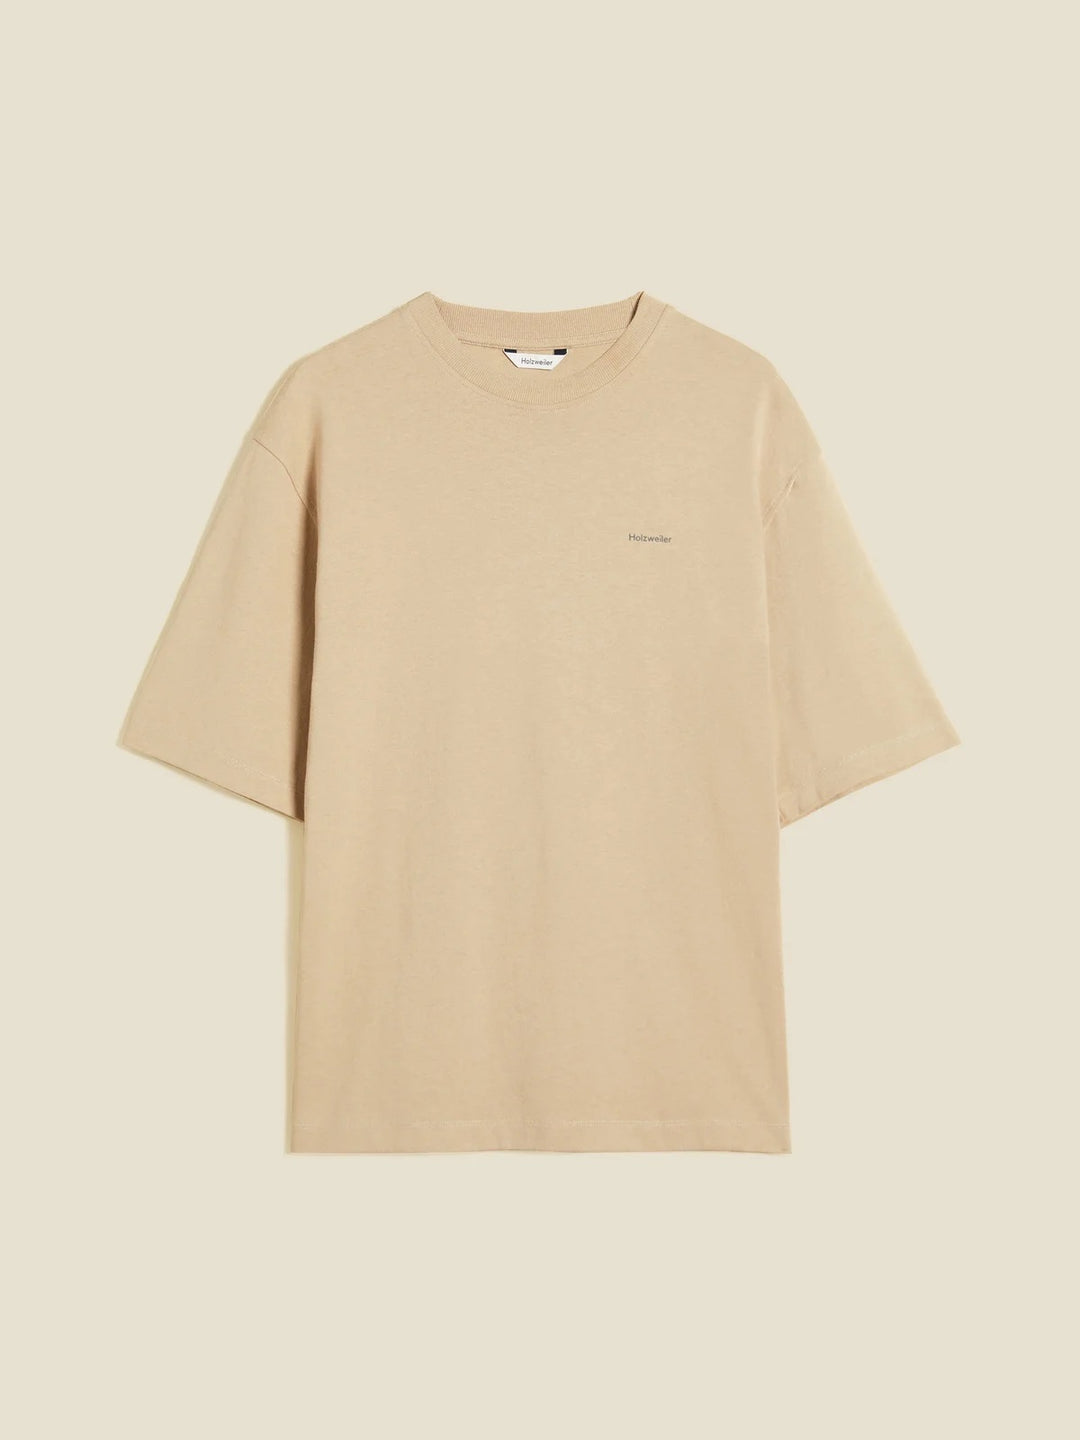 M. Relaxed Tee  Sand